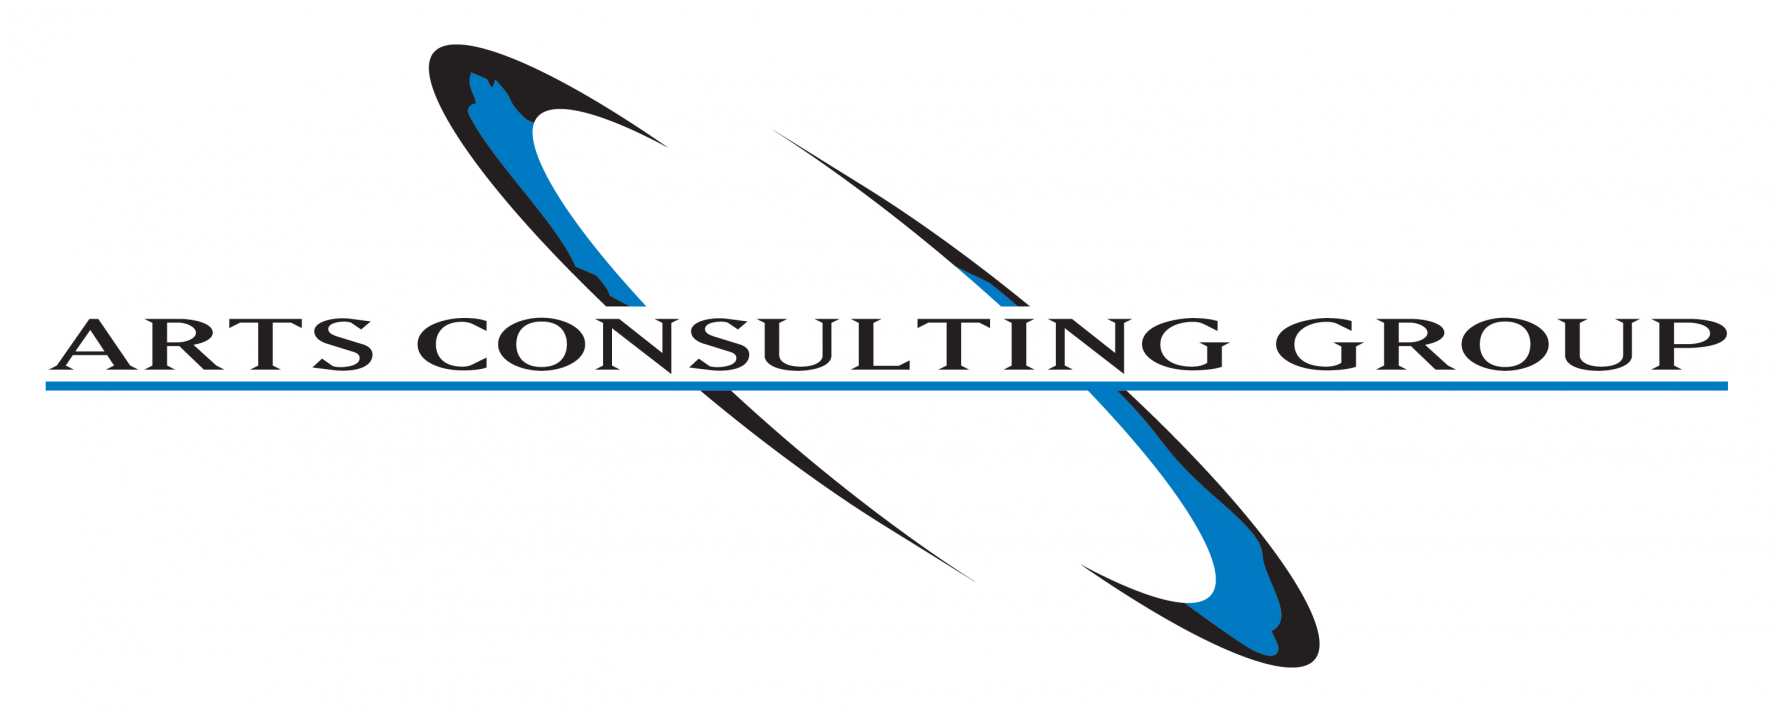 Arts Consulting Group Logo